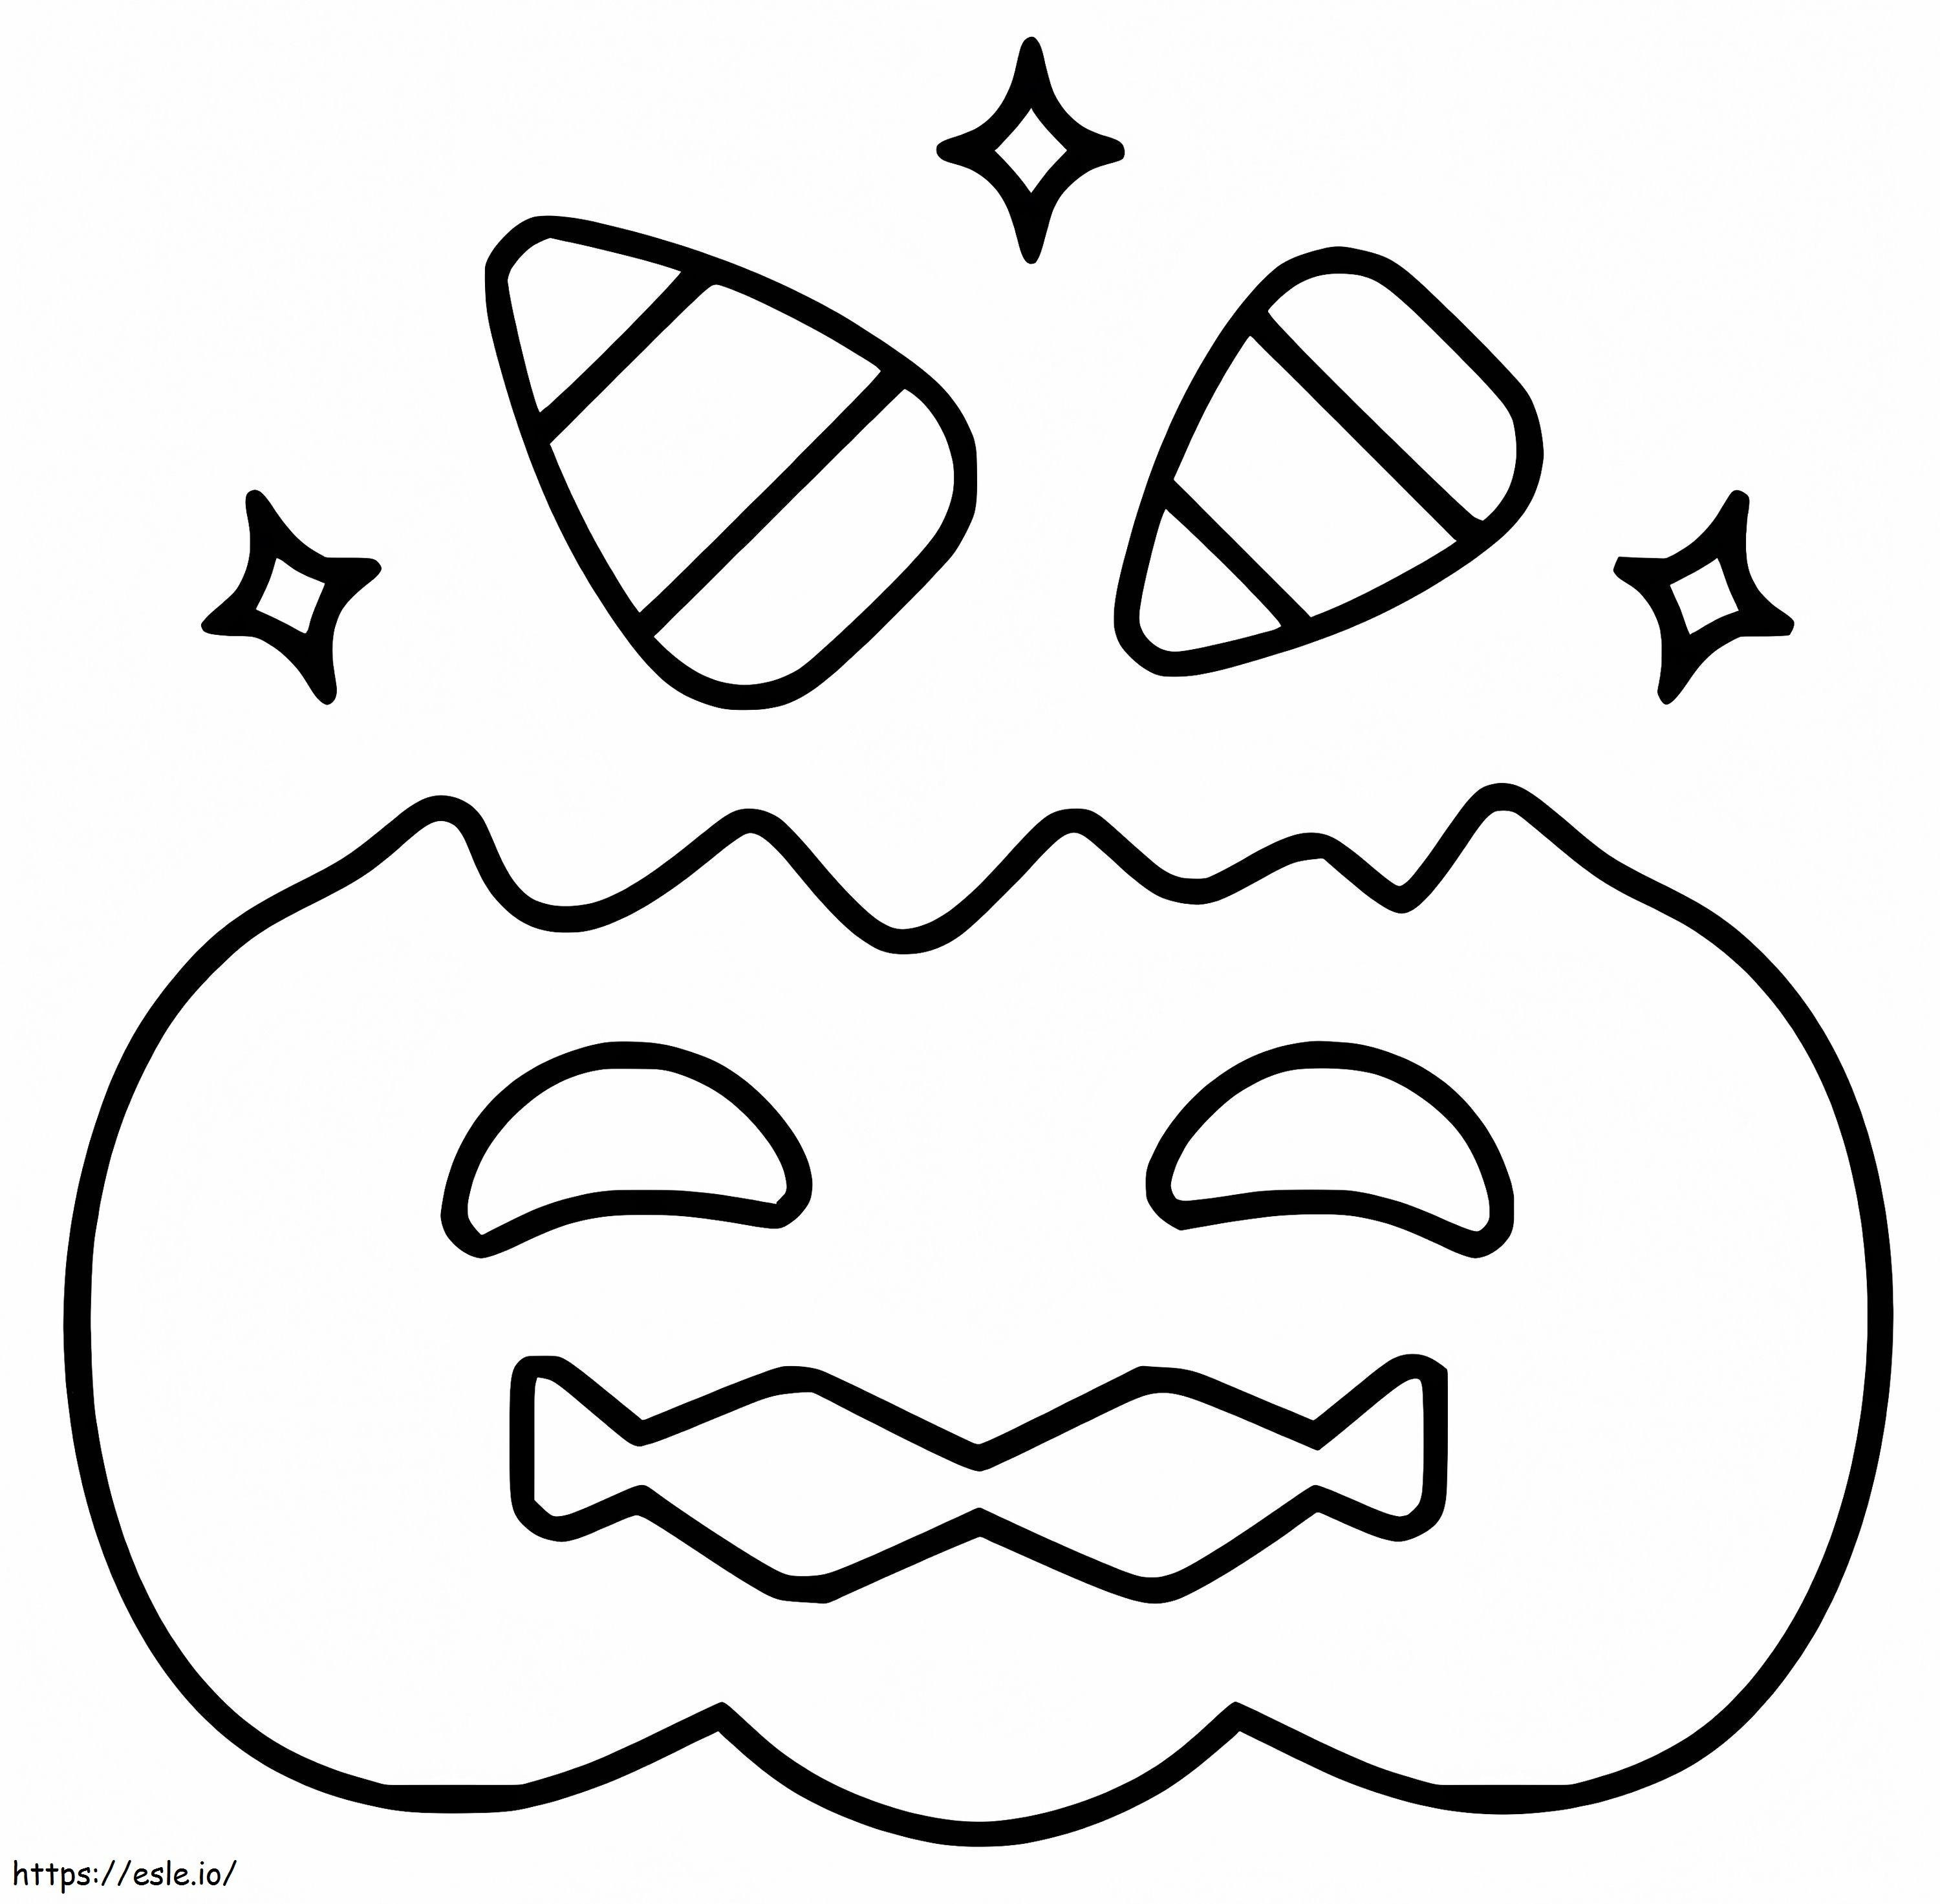 Candy Corn And Pumpkin Bag coloring page